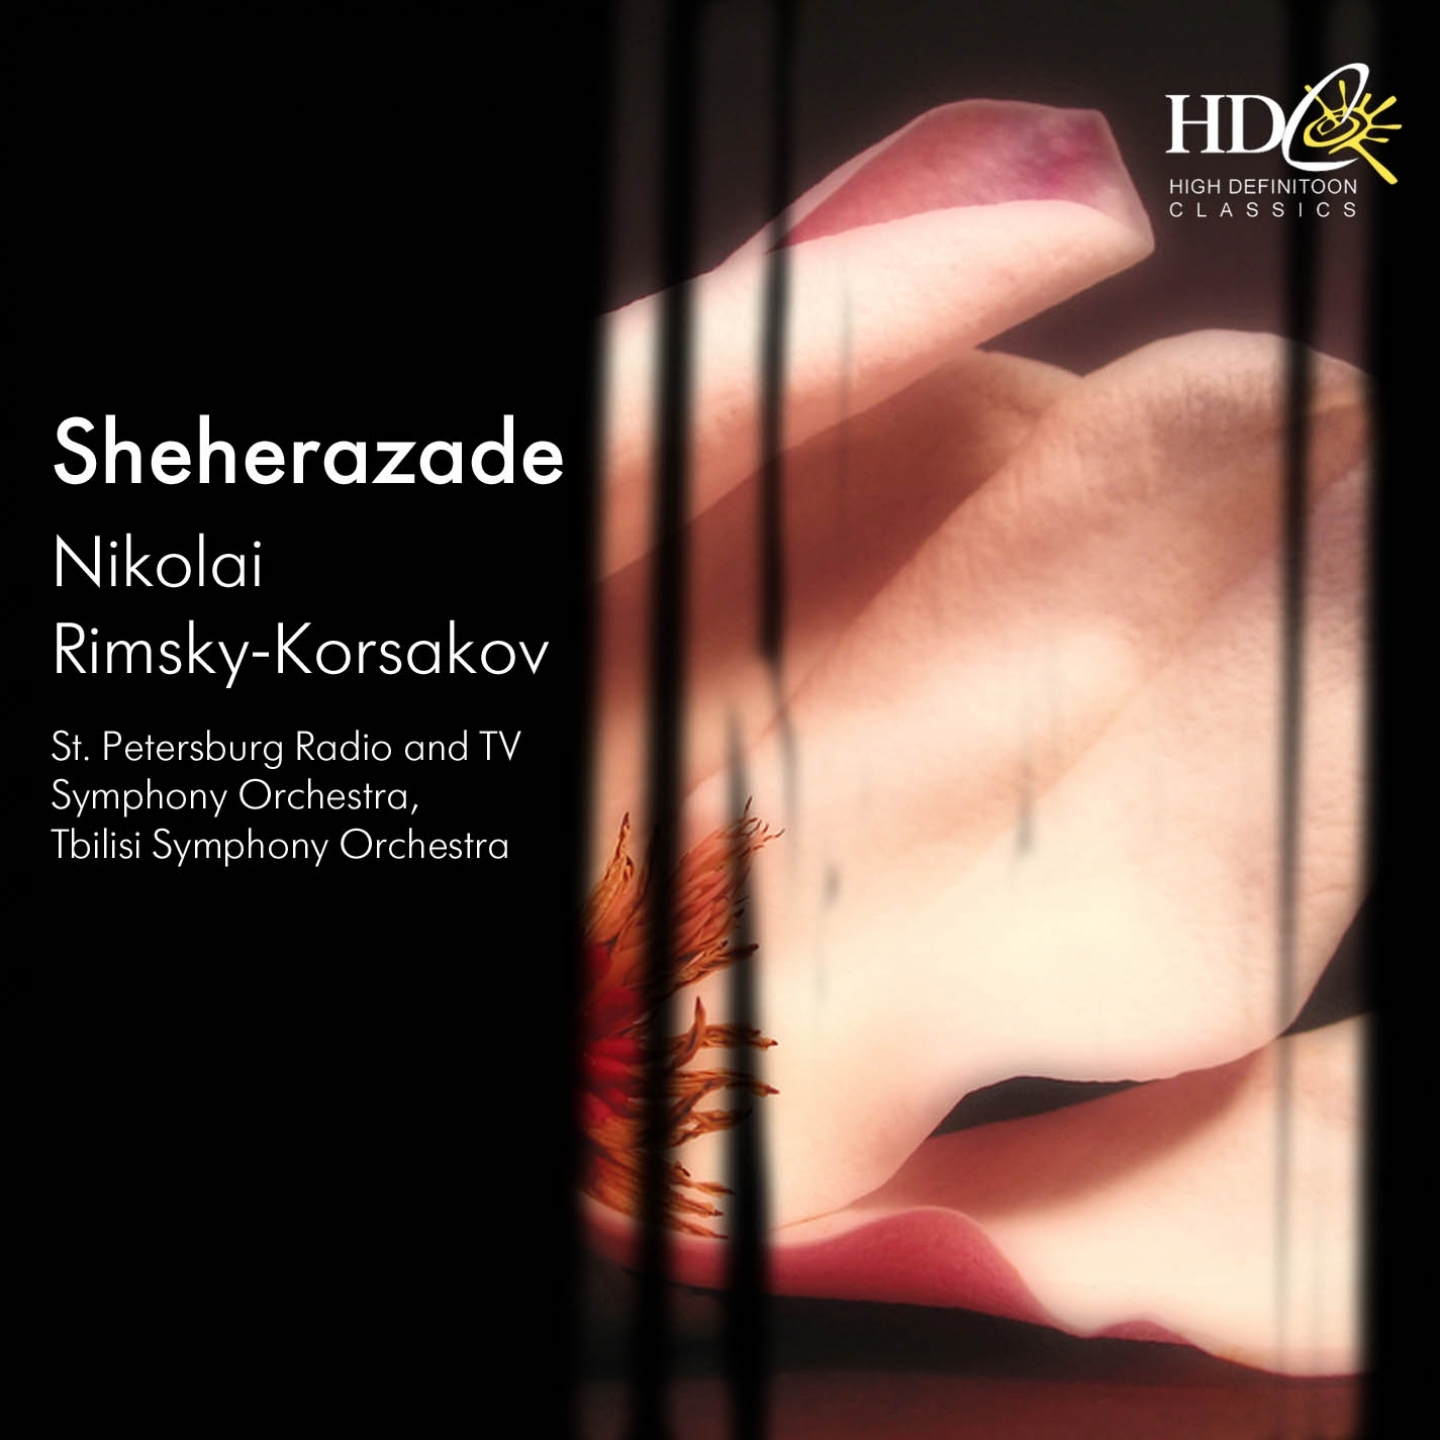 Thousand and One Night, Sheherazade (Symphonic Suite), Op. 35: I. The Sea and Sindbad's Ship